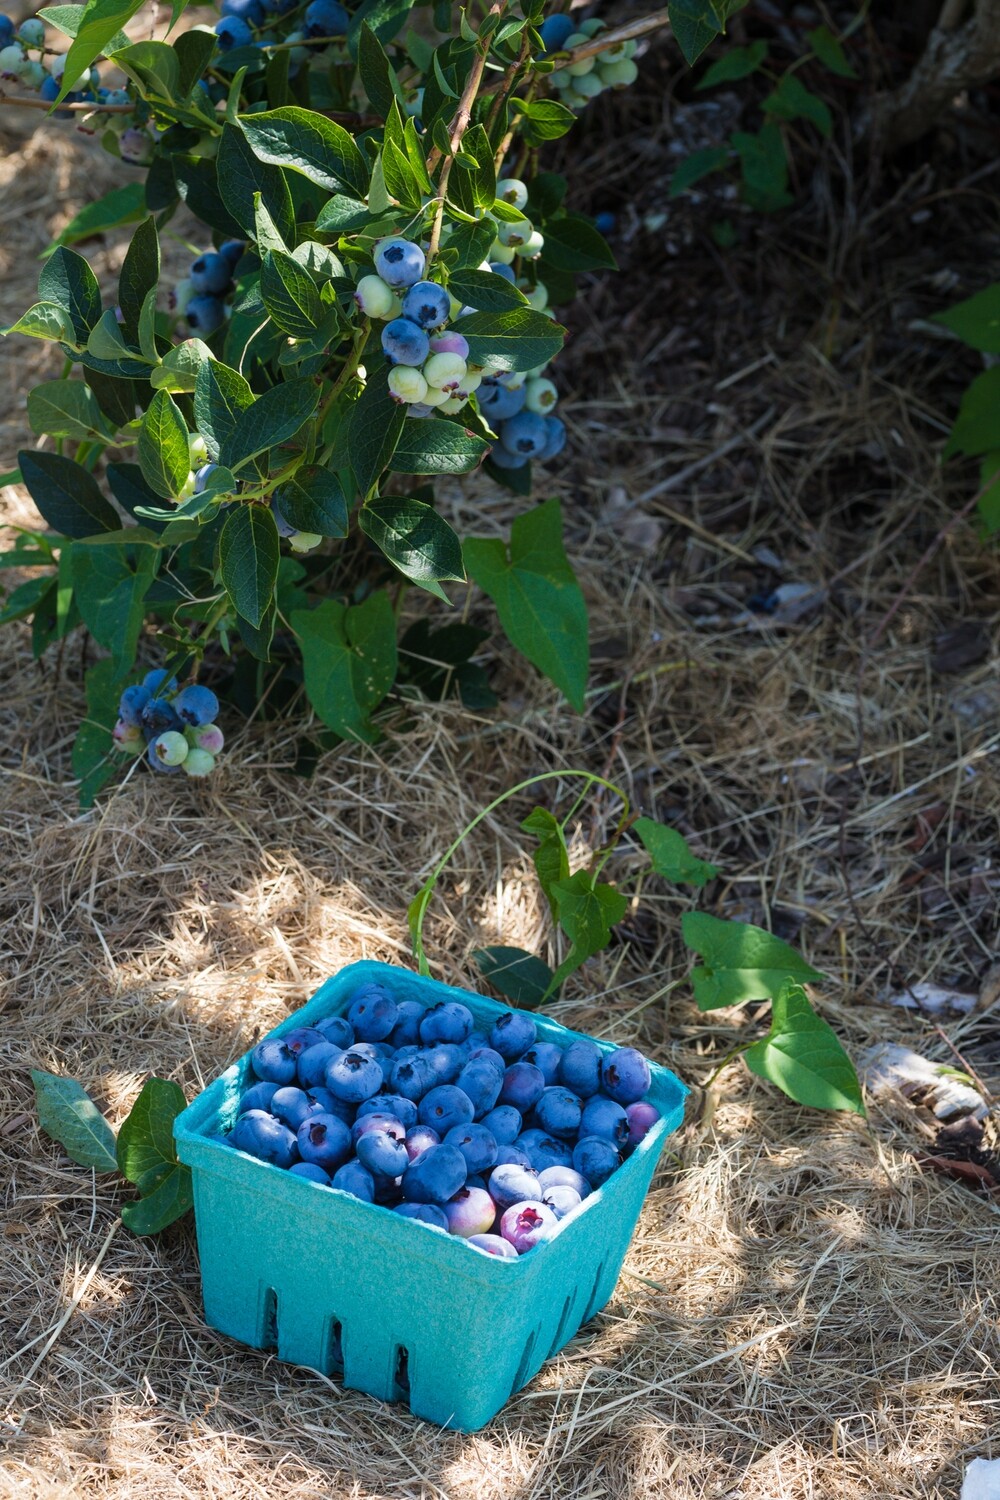 OUR OWN Blueberries - Pint